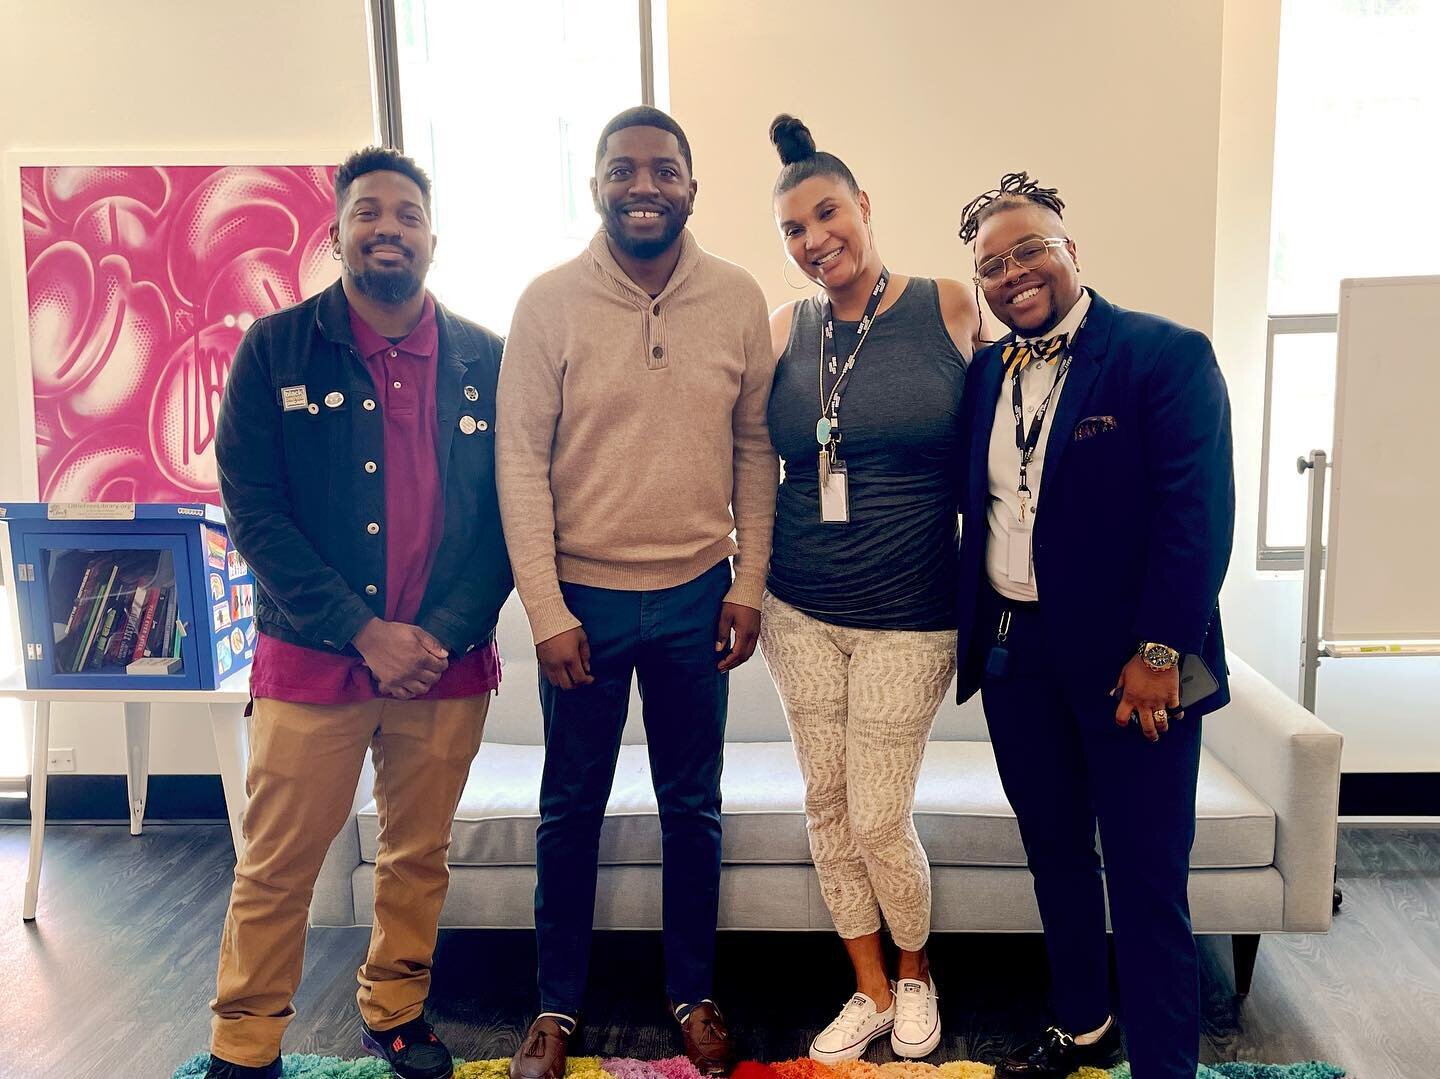 We&rsquo;re feeling excited, renewed, and more deeply connected to our community this week after spending some time with @bravespacealliance (BSA), as well as @glaad at @aidsfoundationchicago (AFC)! Our ED, Jamie Frazier, and Manager of Organizing, M